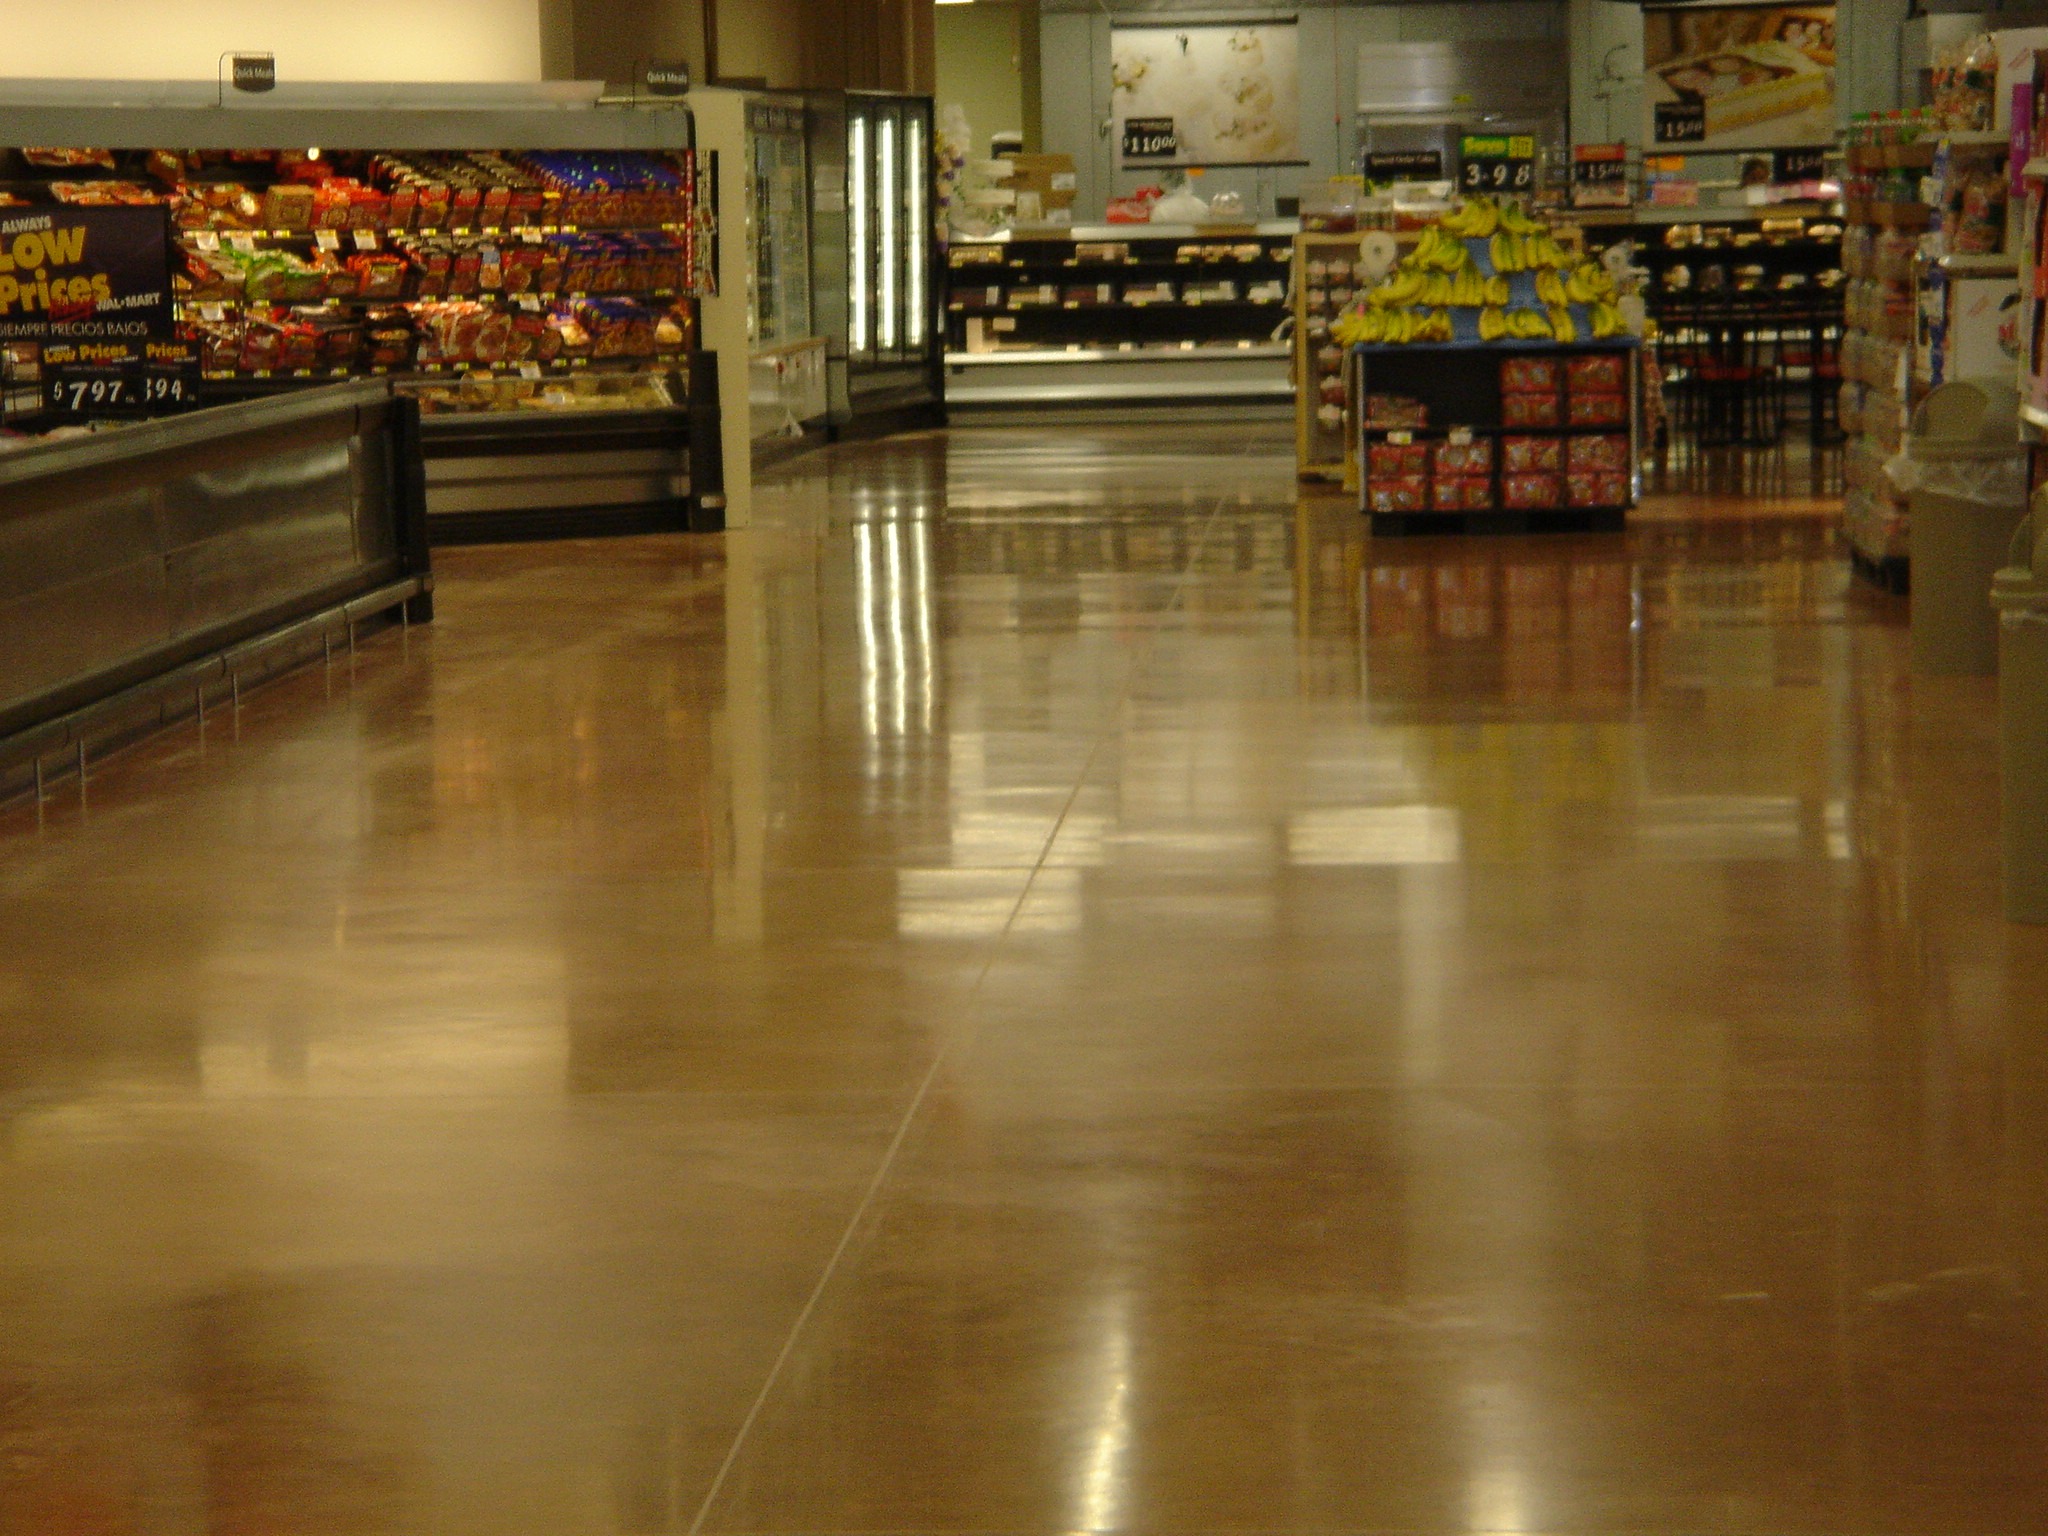 Sam's Club Polished Store - Exposed